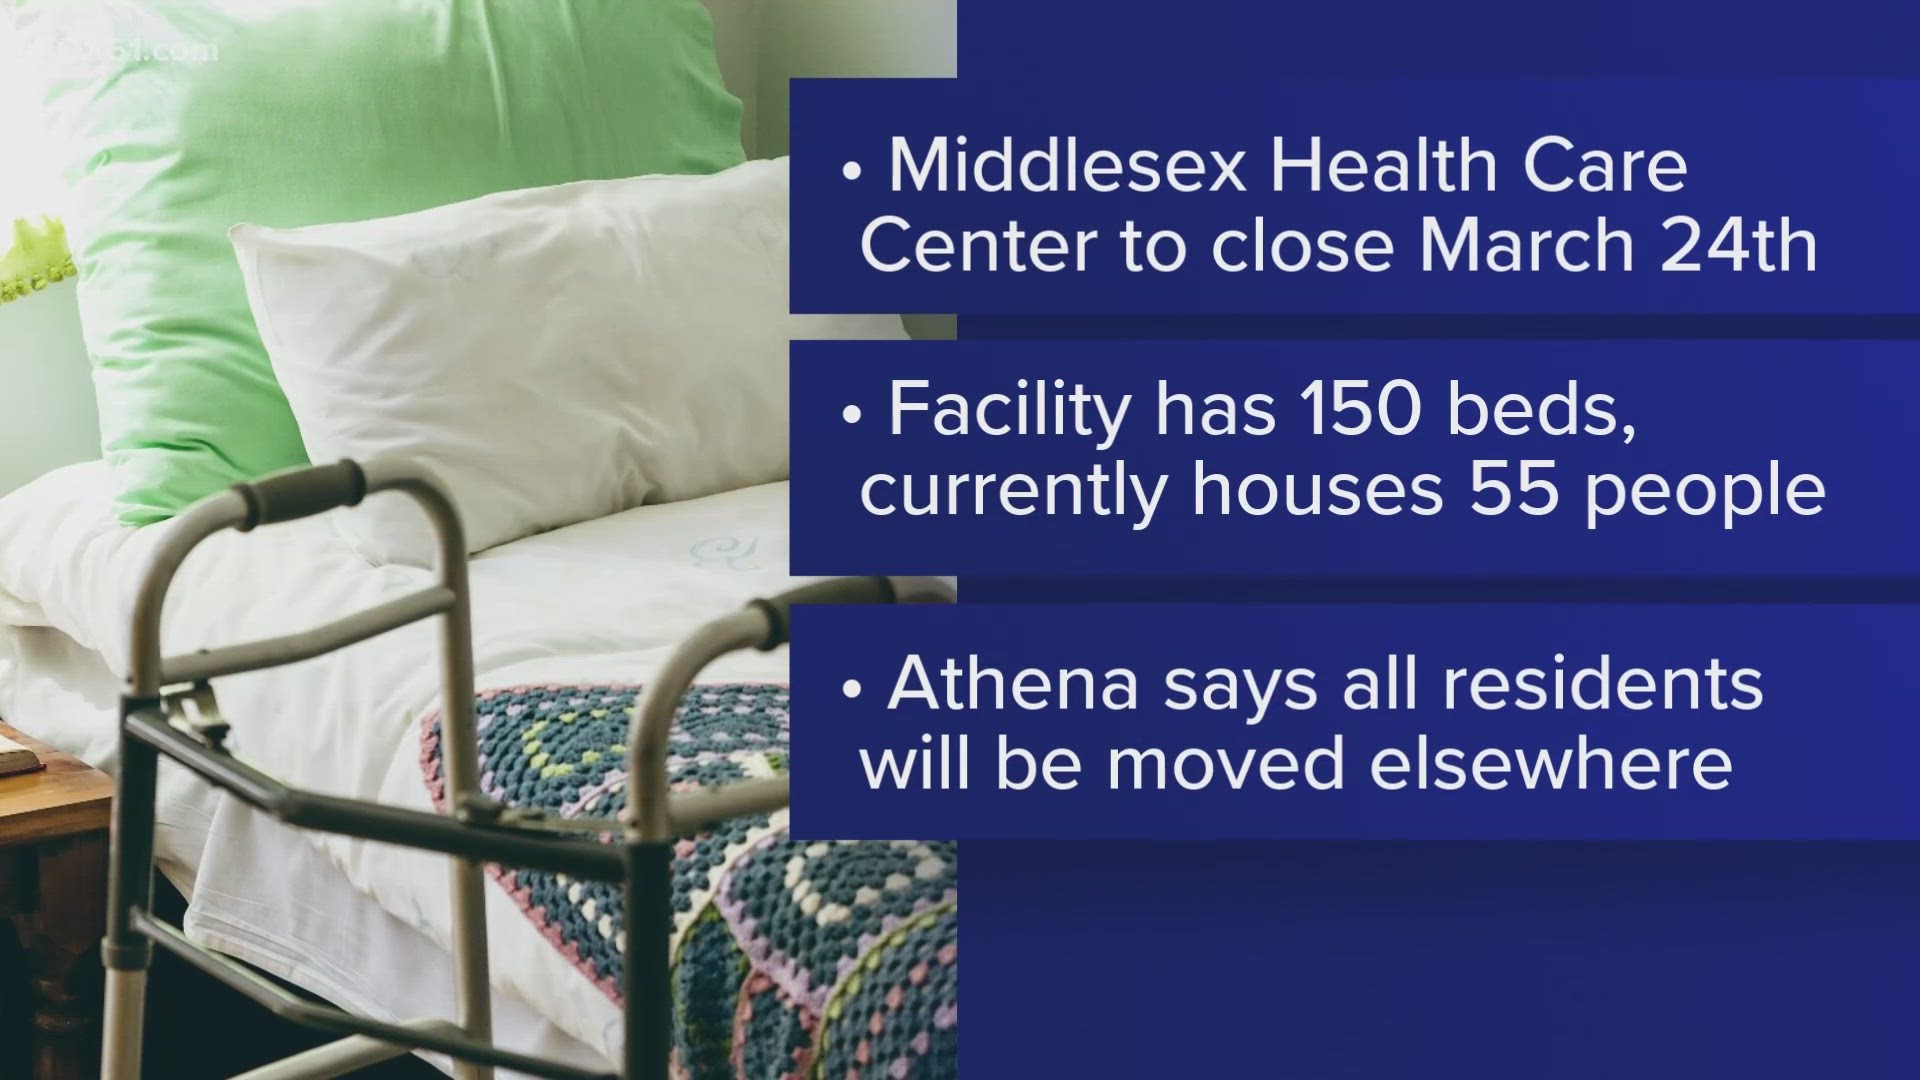 The state approved the closure of Middlesex Health Care Center, officials said. The skilled nursing center is expected to close on or before March 4.